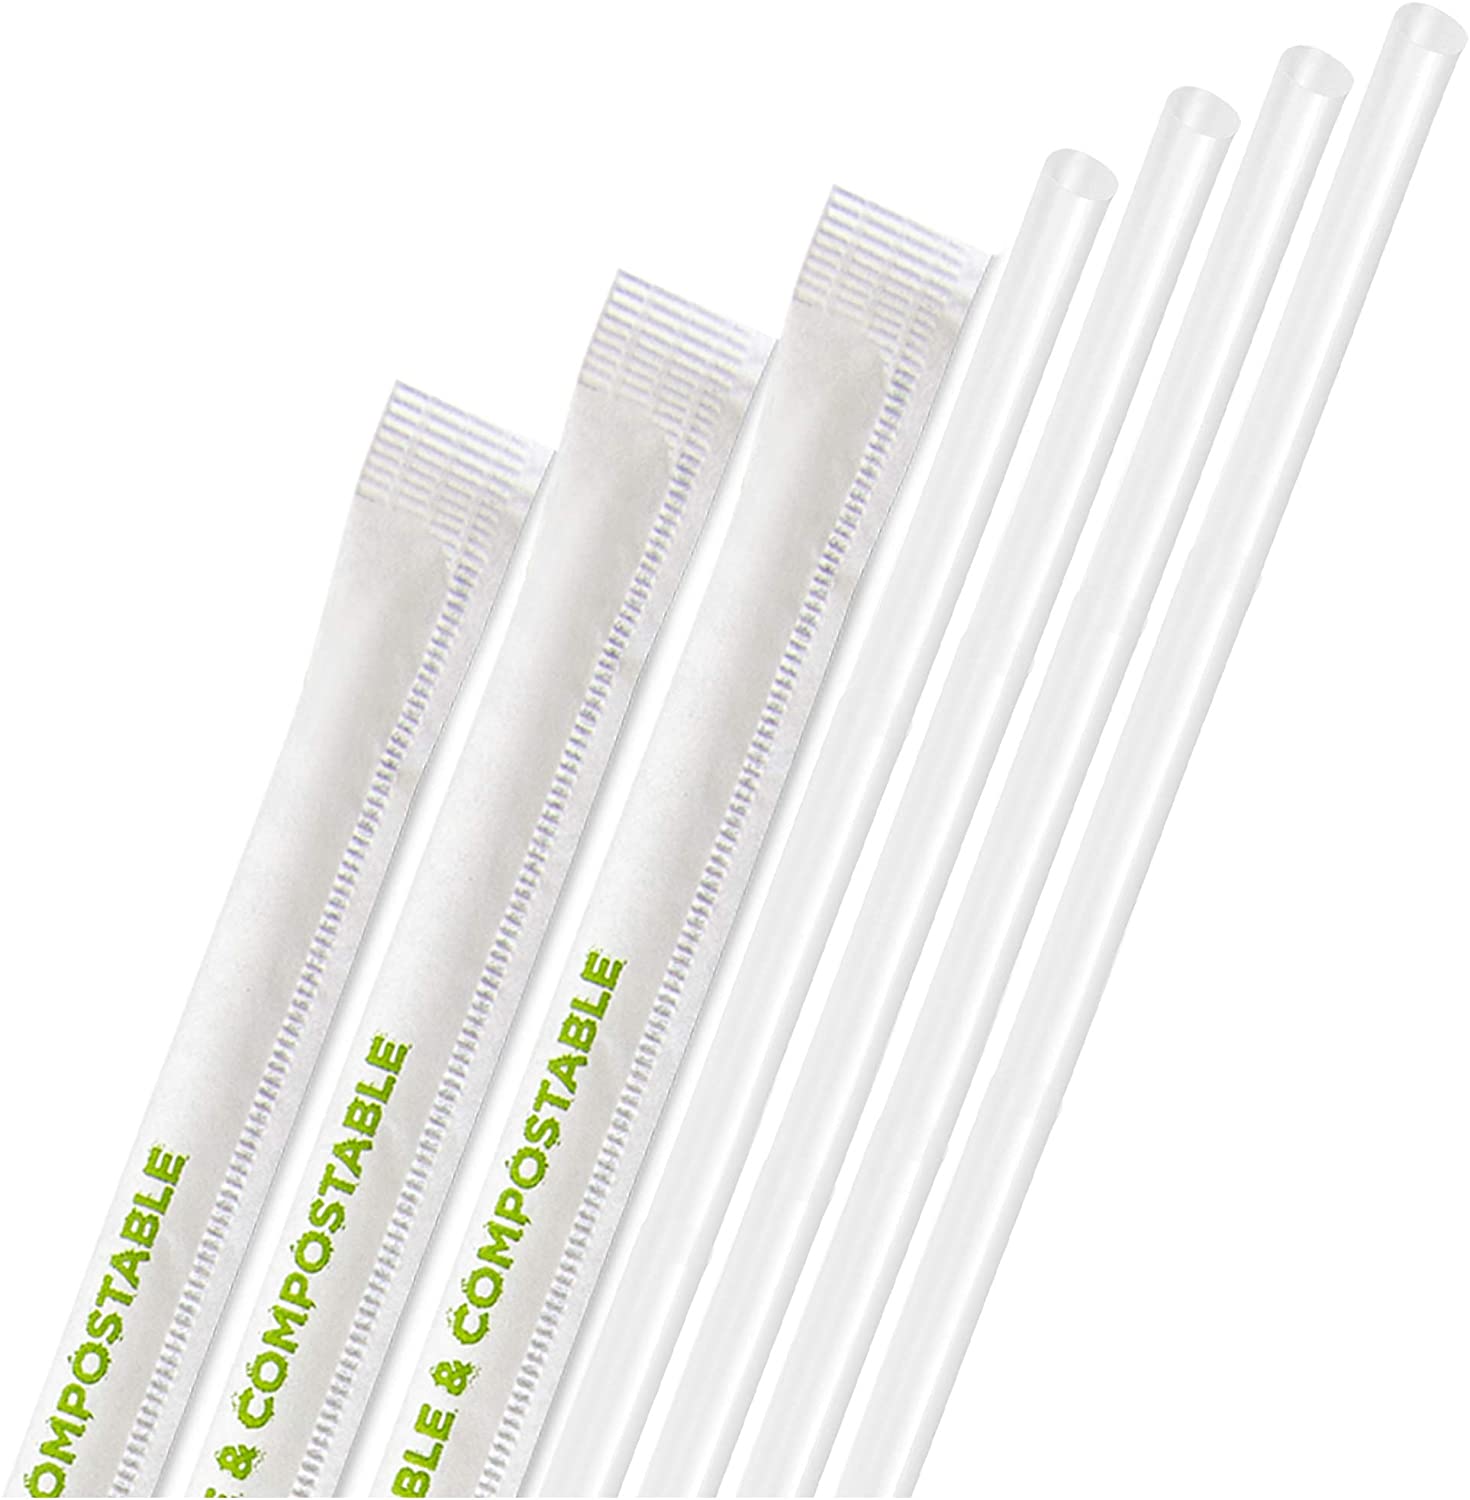 Compostable Straw - Wrapped 4-Ply Natural Cellulose Food-Safe Paper - –